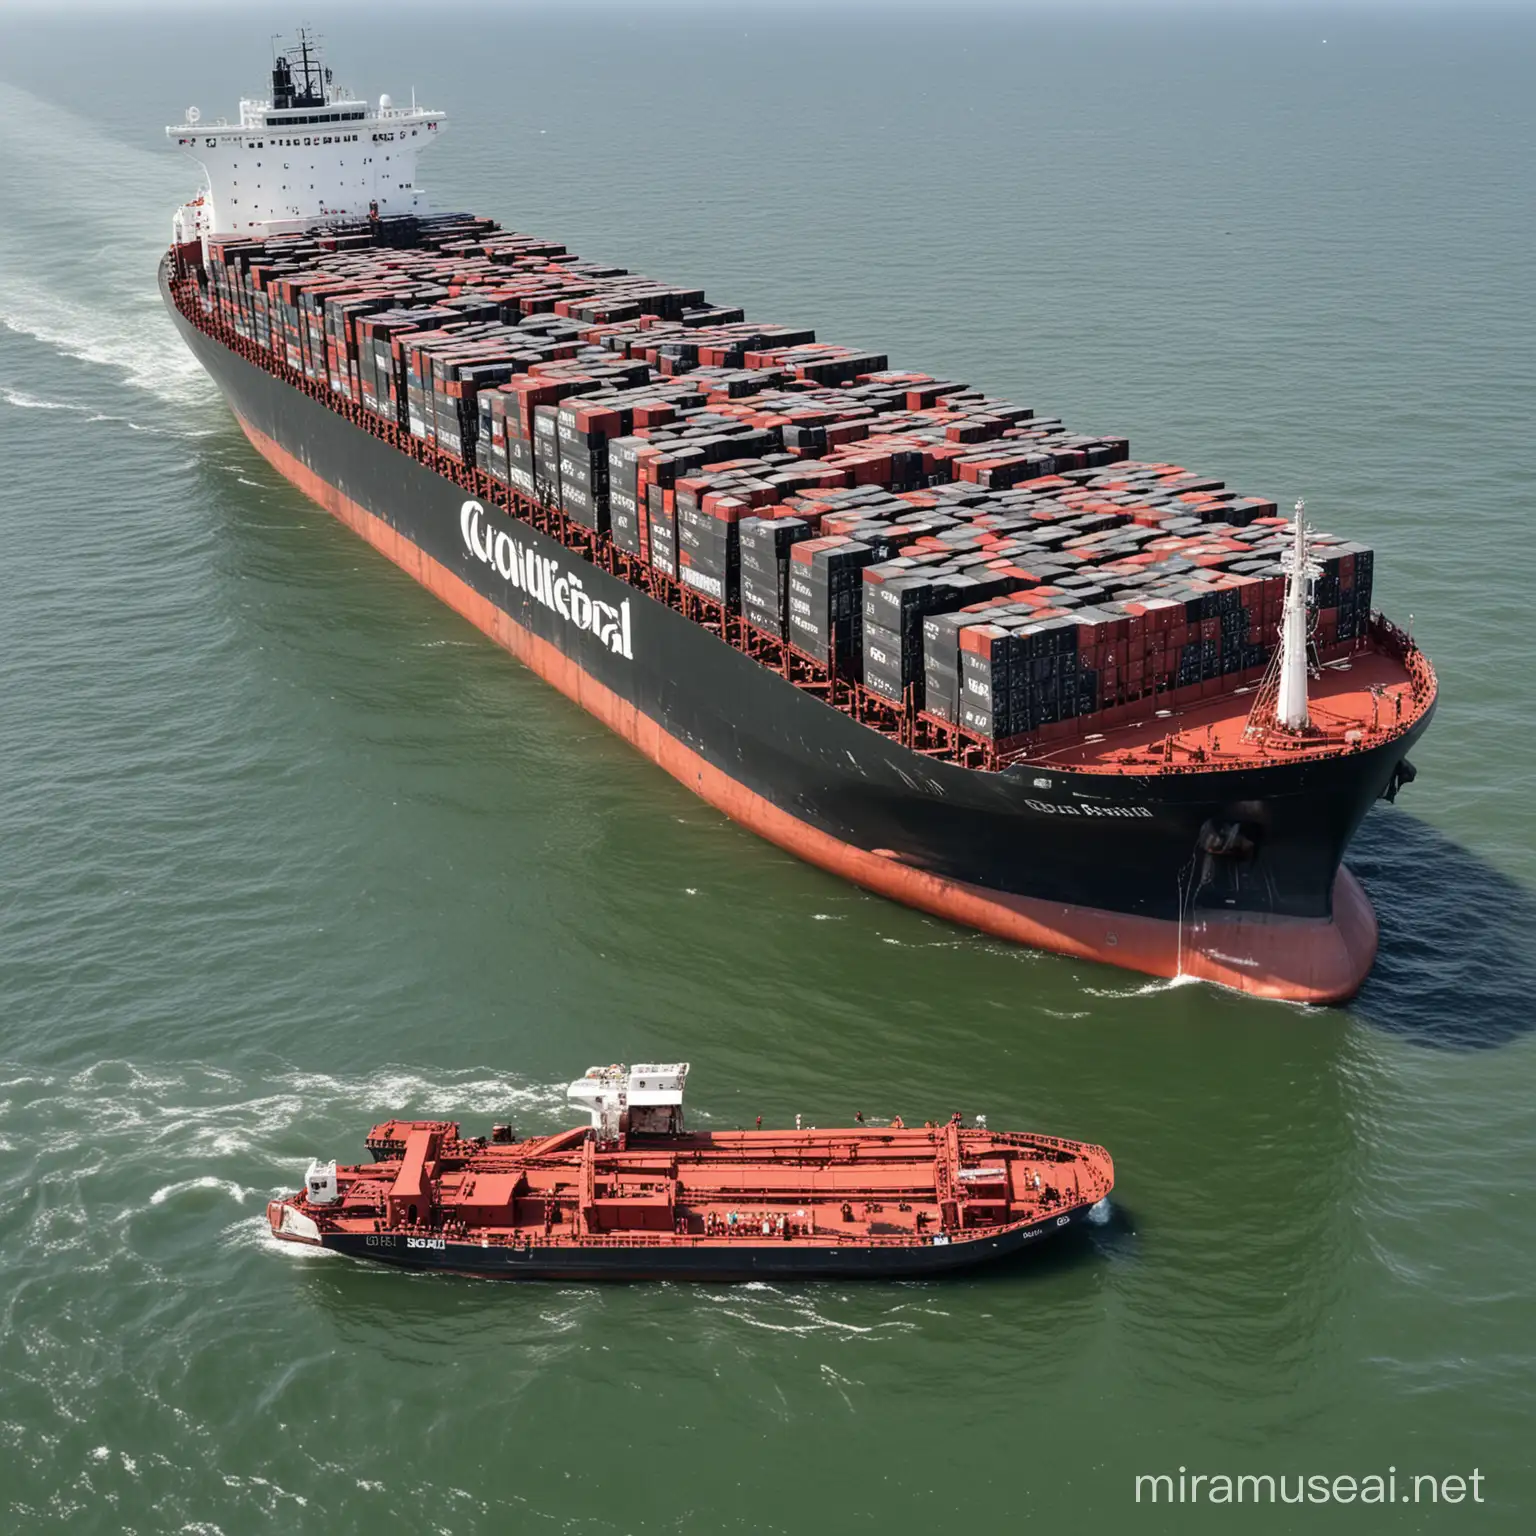 Massive Cargo Ship Loaded with CocaCola Products Docked in Brazil